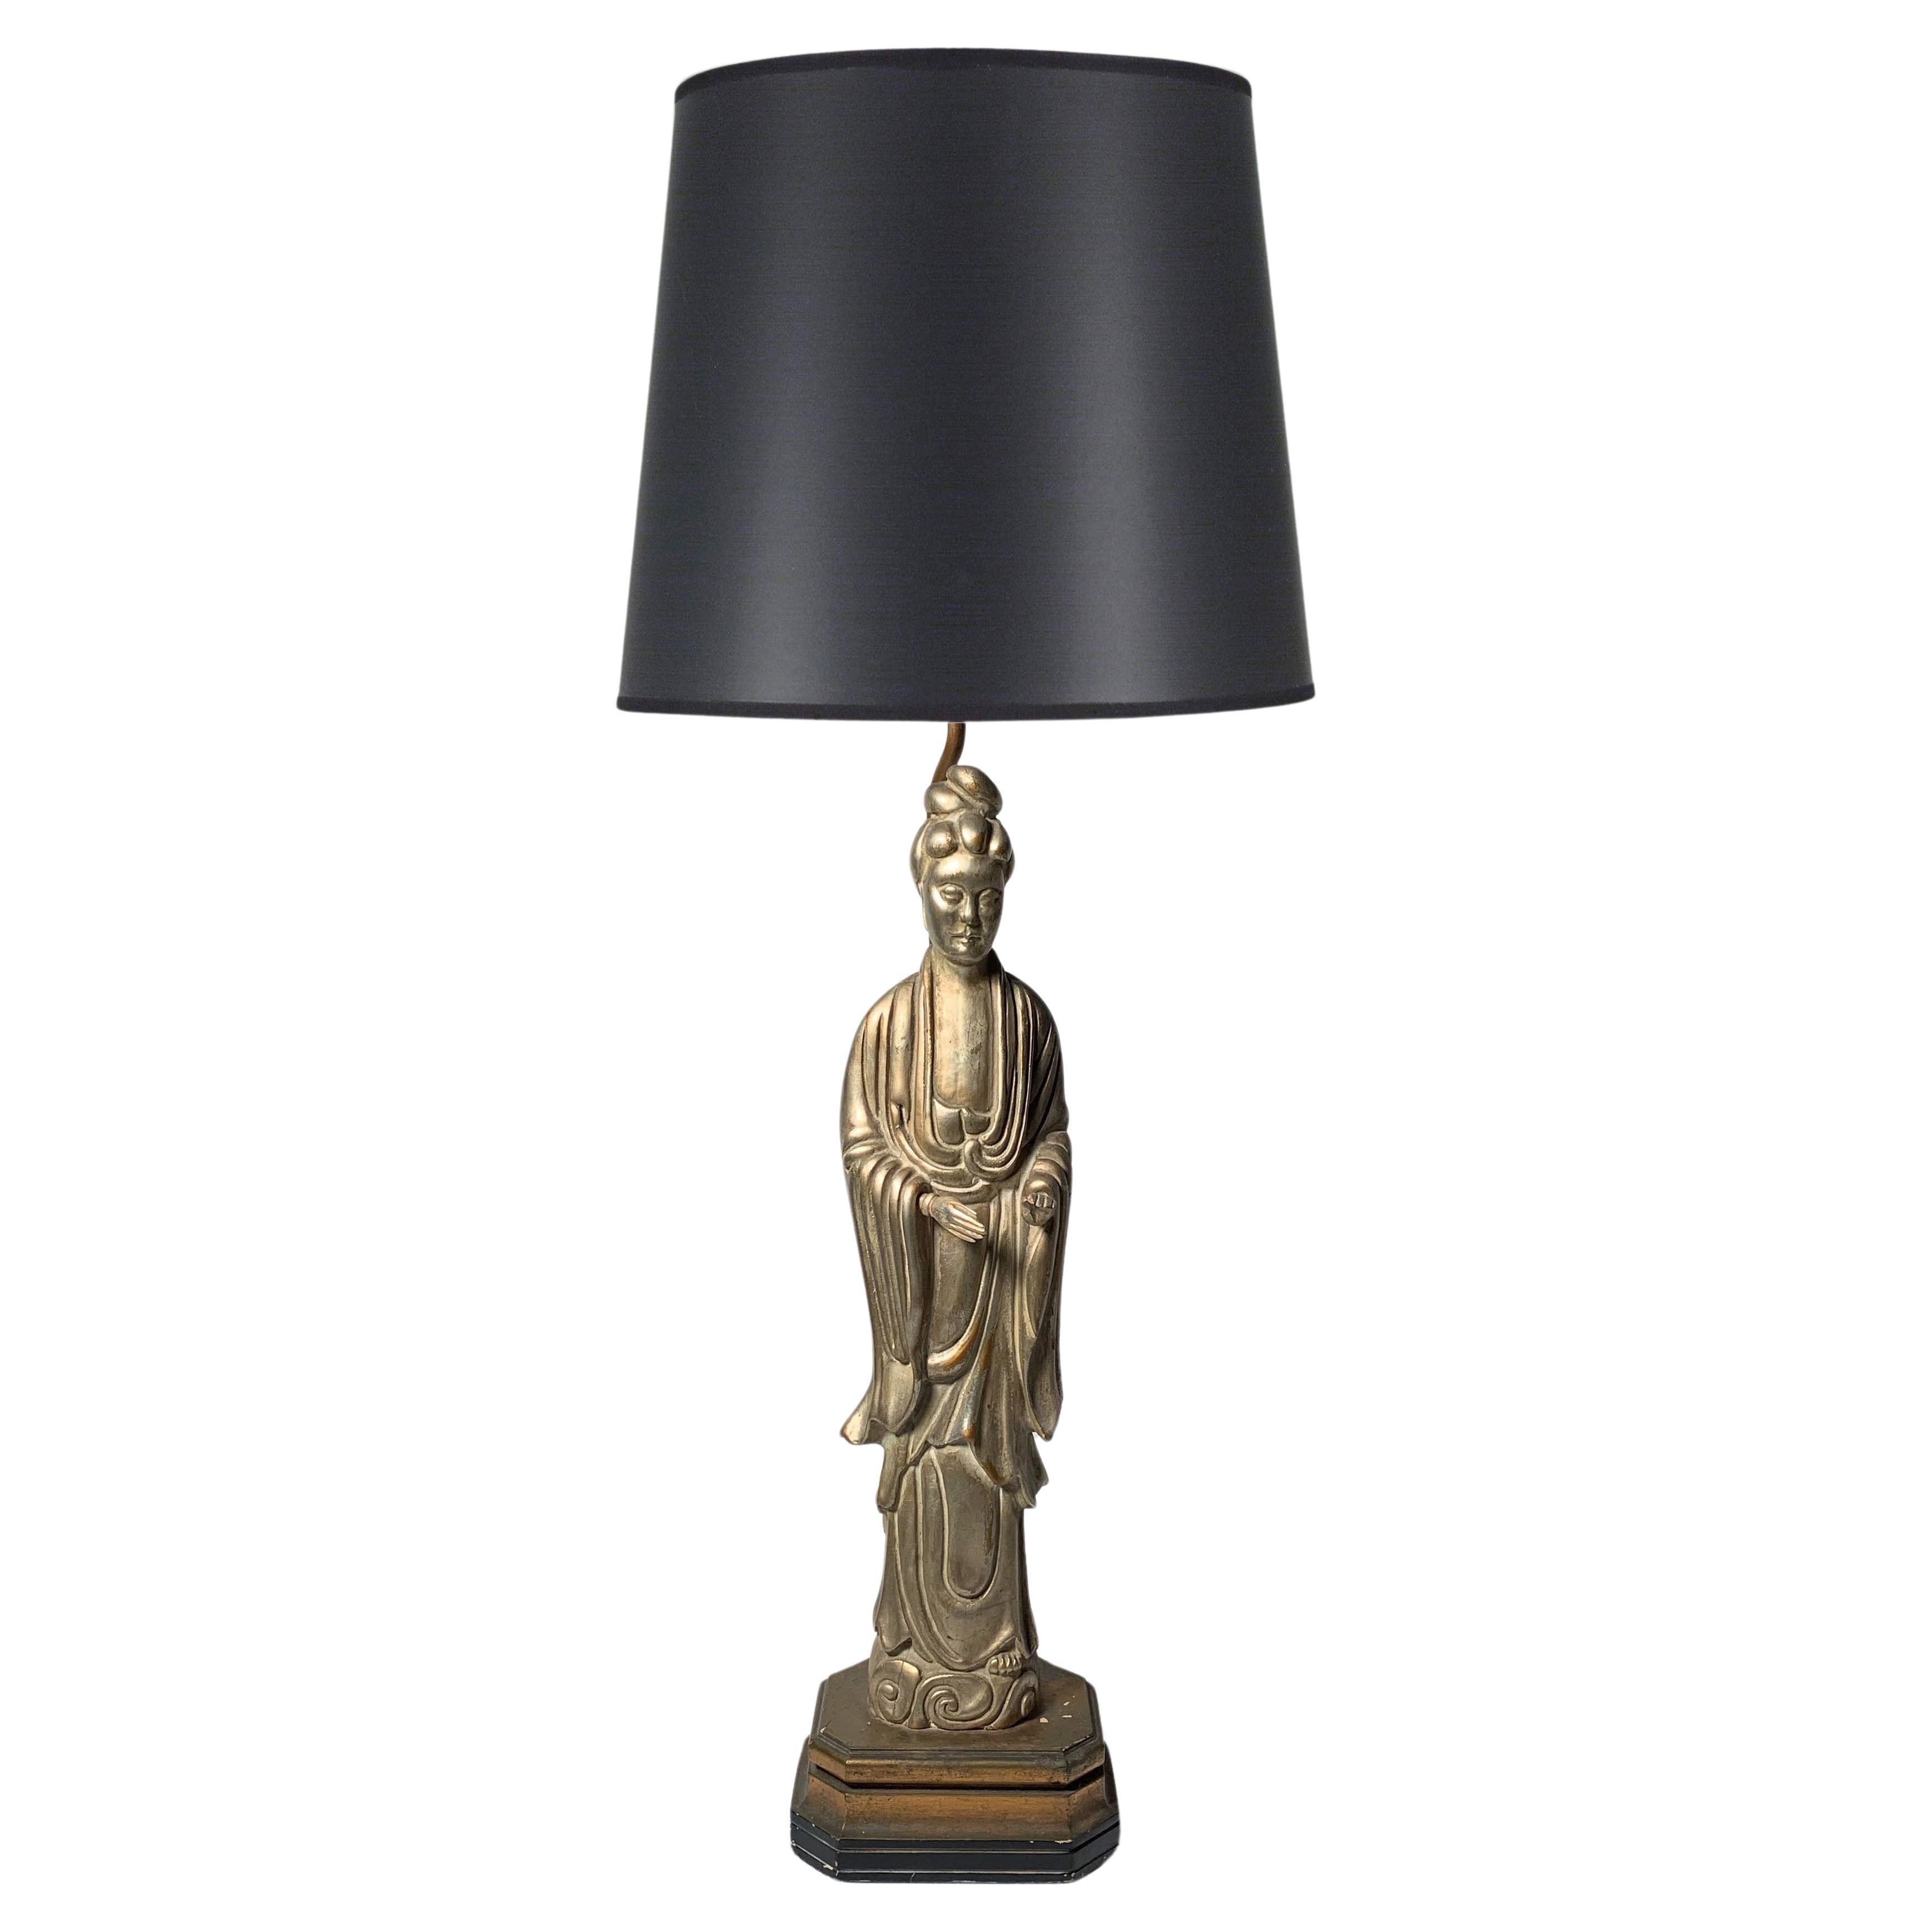 Vintage Oriental Quan Yin Table Lamp with Silver Finish in manner of James Mont